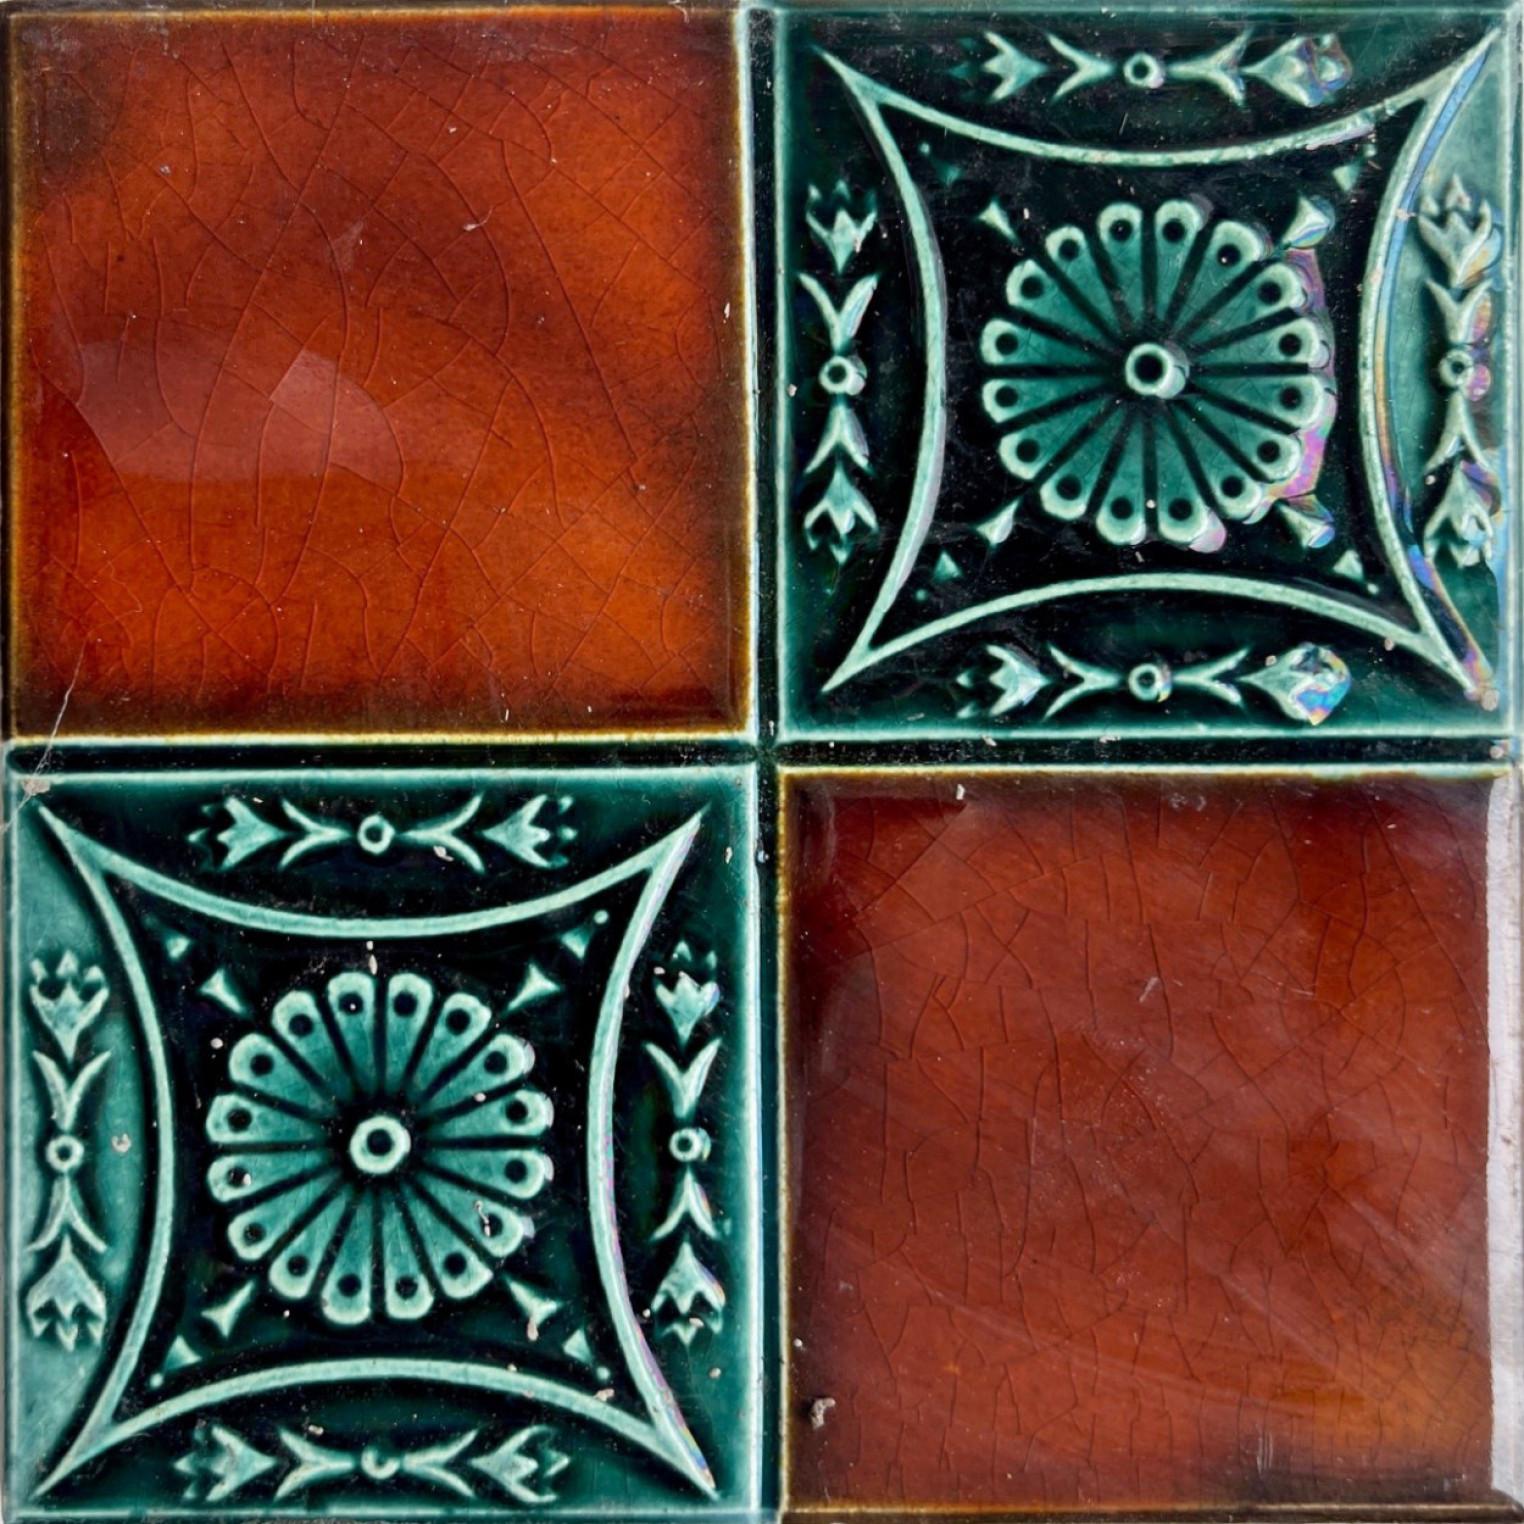 1 of the 30 handmade antique tiles in rich brown and green glazed colors. Manufactured around 1920 by Gilliot Hemiksem, Belgium. One tile is divided in four squares, two brown and two relief green. These tiles would be charming displayed on easels,